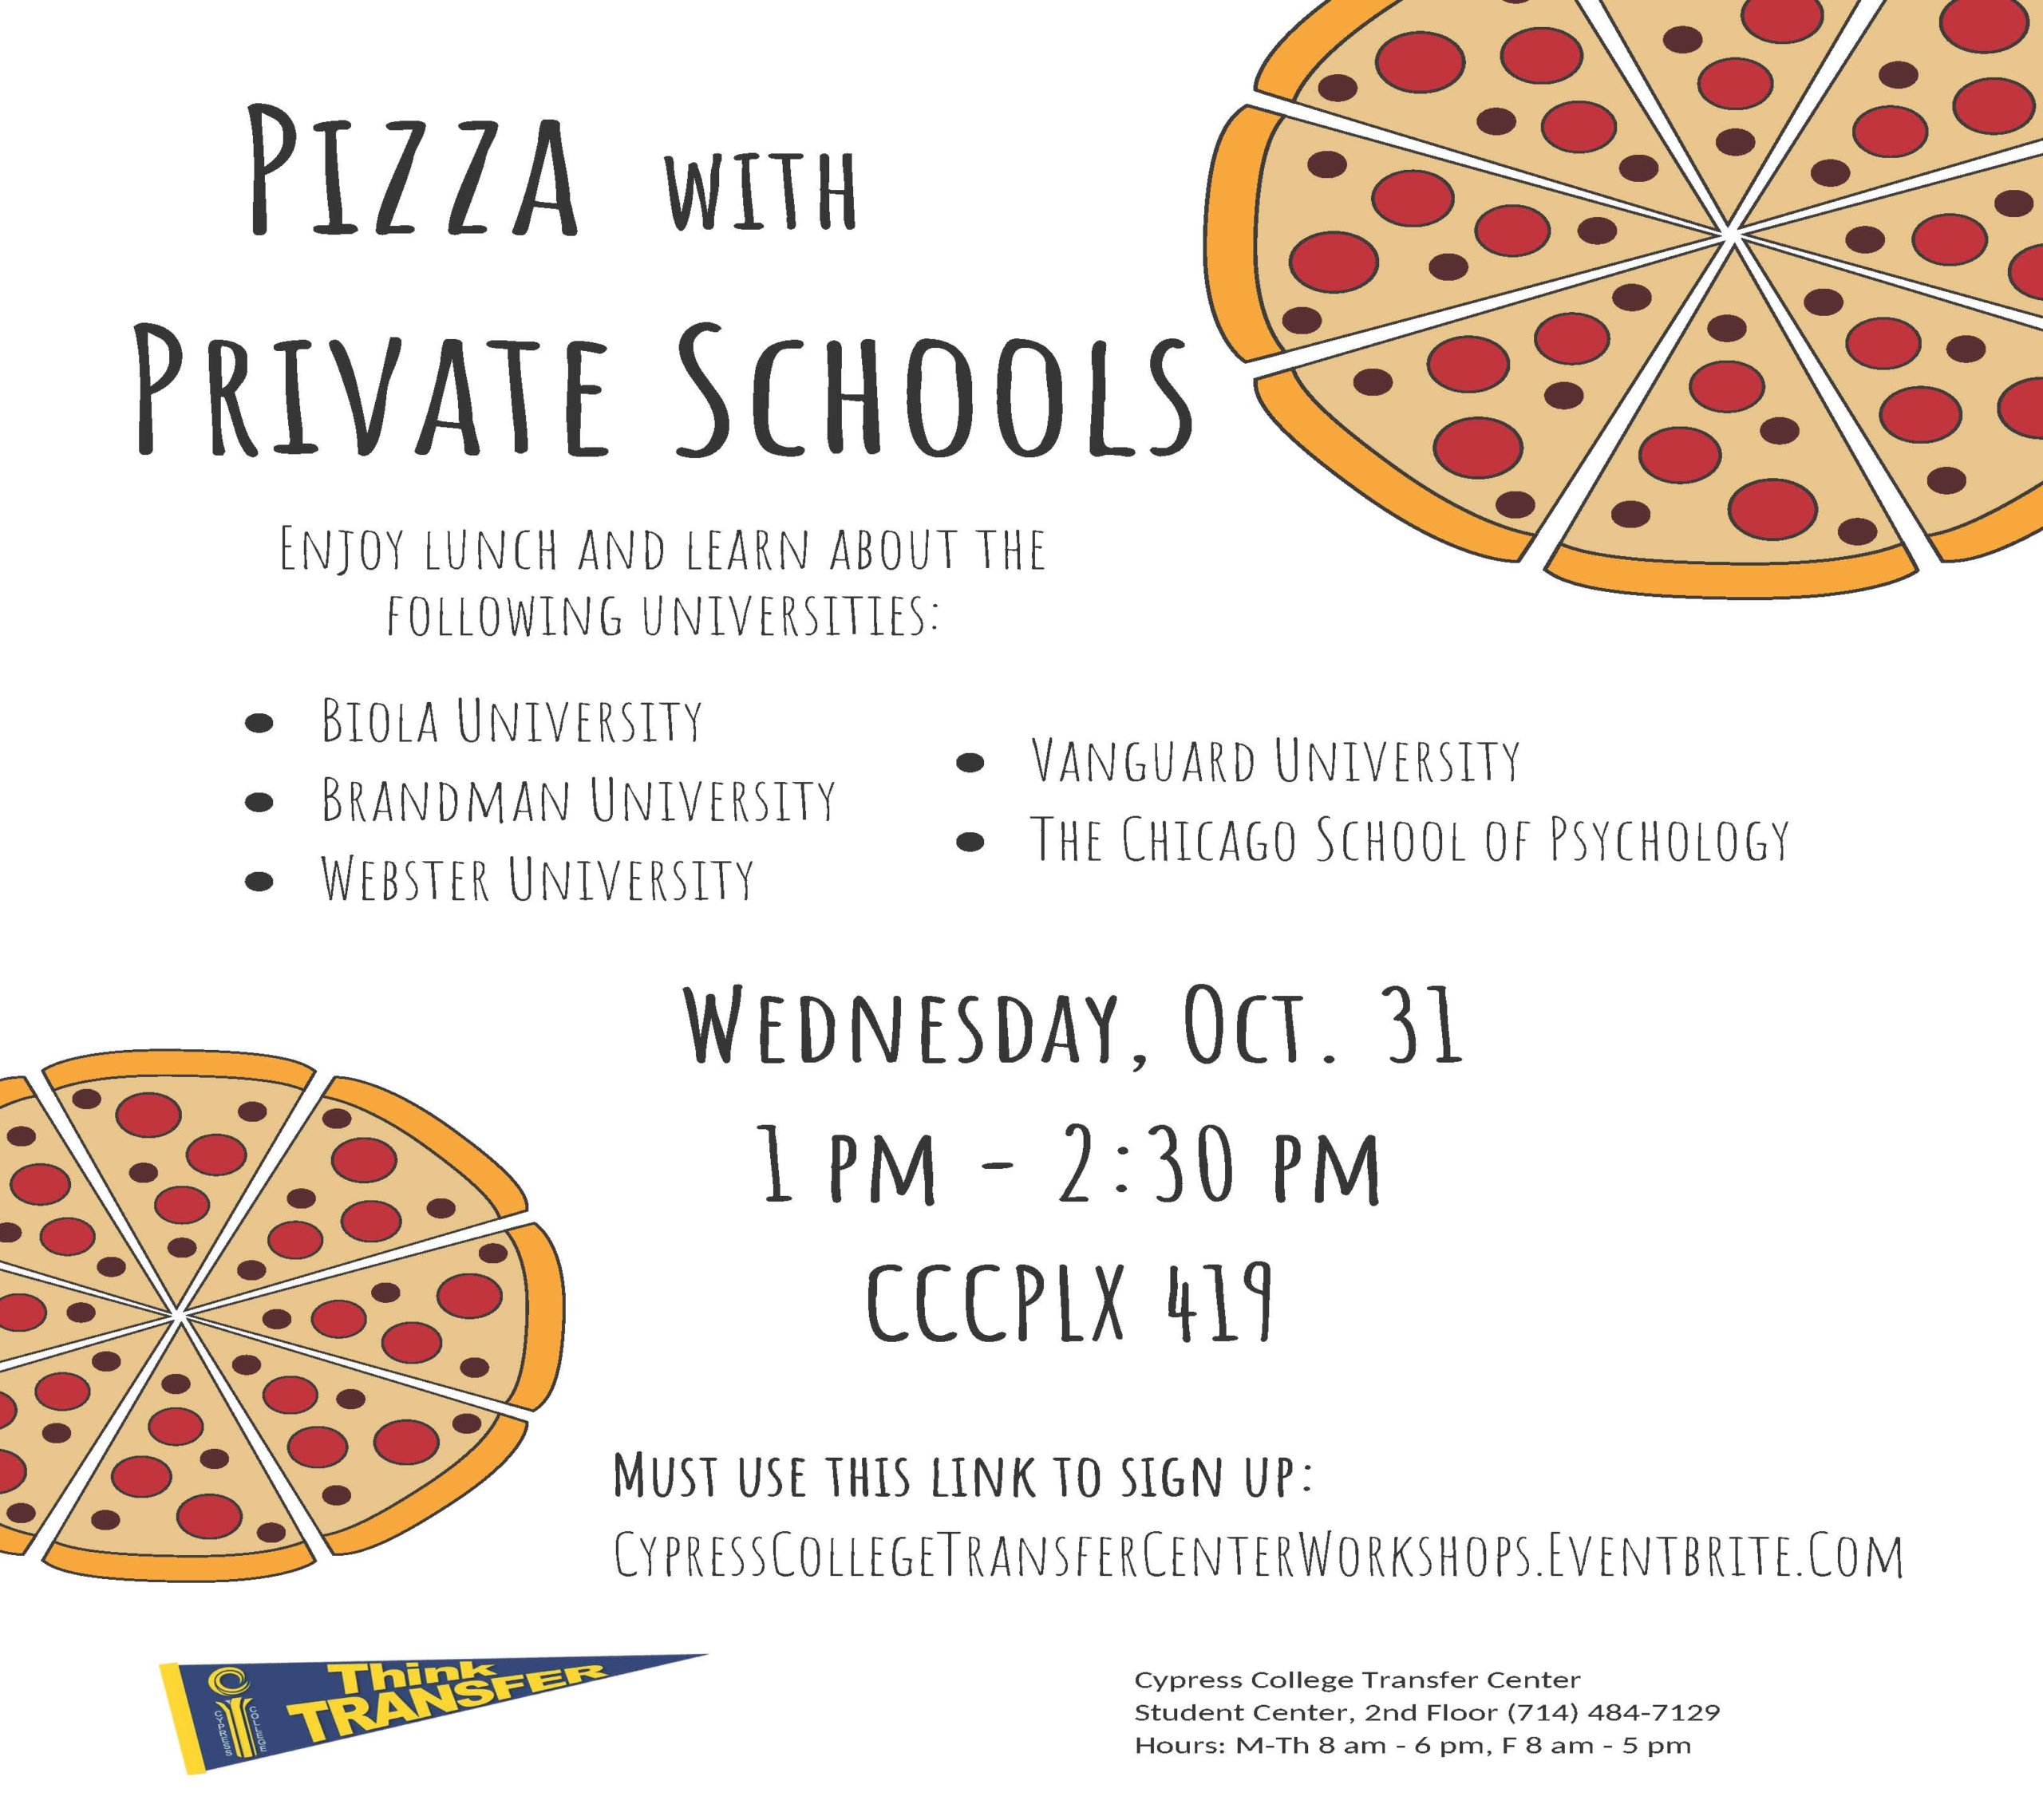 Pizza with Private Schools flyer with images of pepperoni pizza and school pennant.